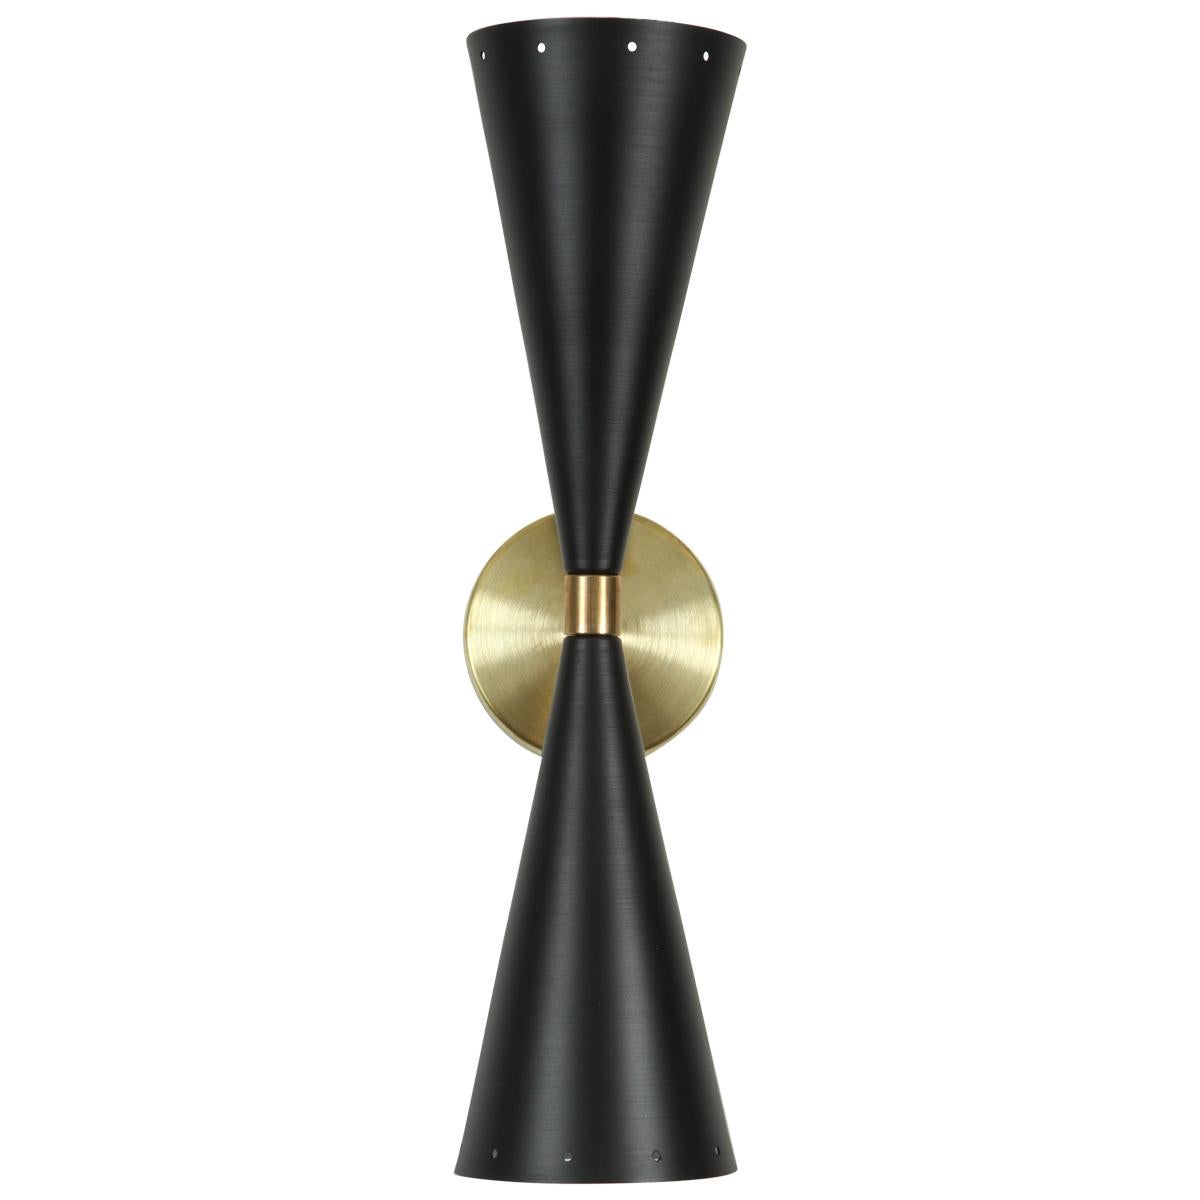 Black and Brass Double Cone Sconce by Lawson-Fenning